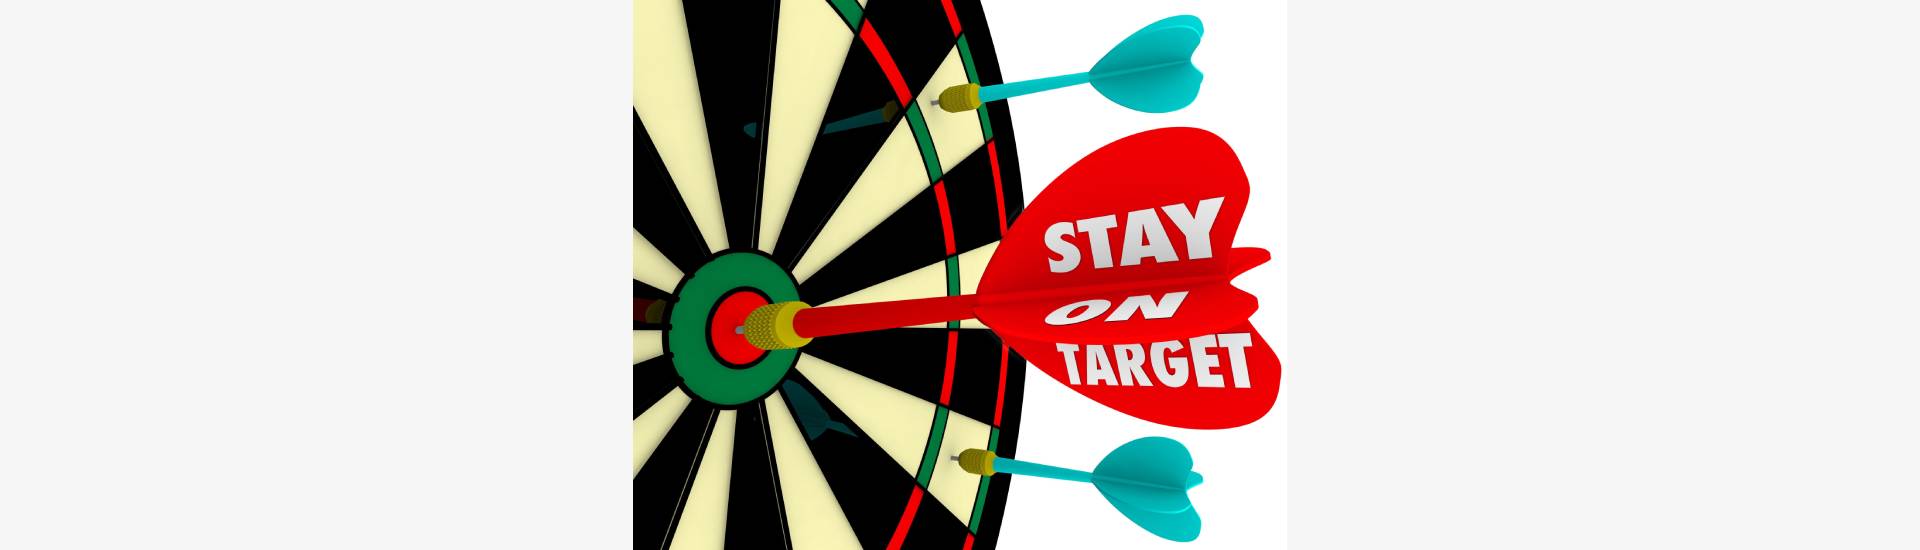 A red and white target with three blue arrows on it.